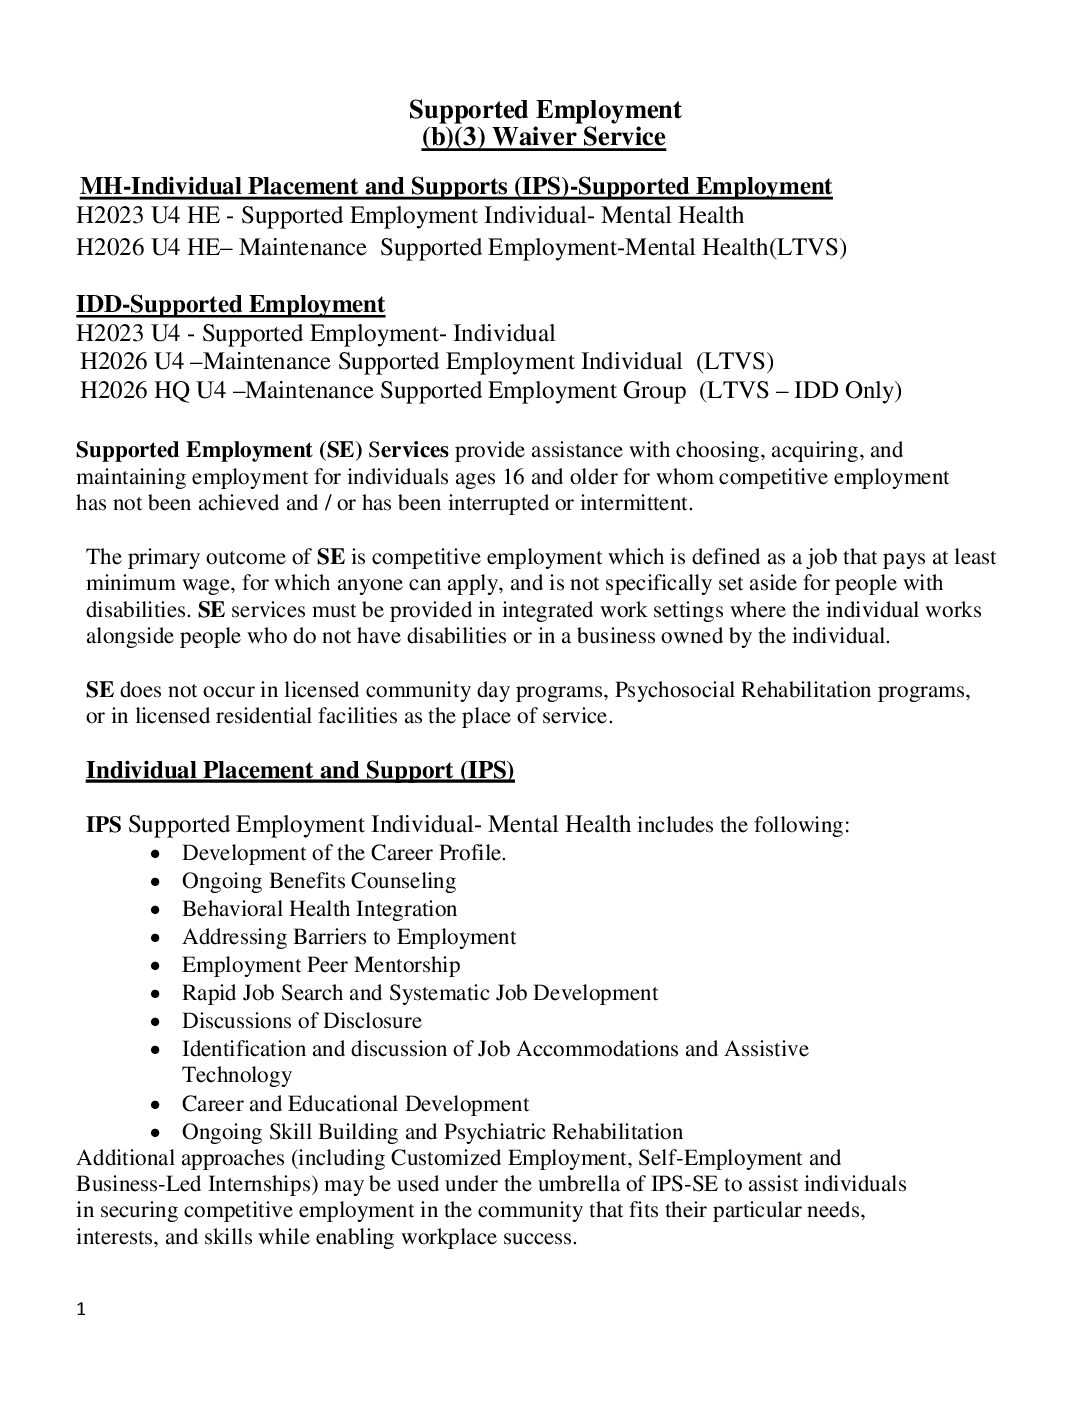 Supported Employment (b)(3) Waiver Service